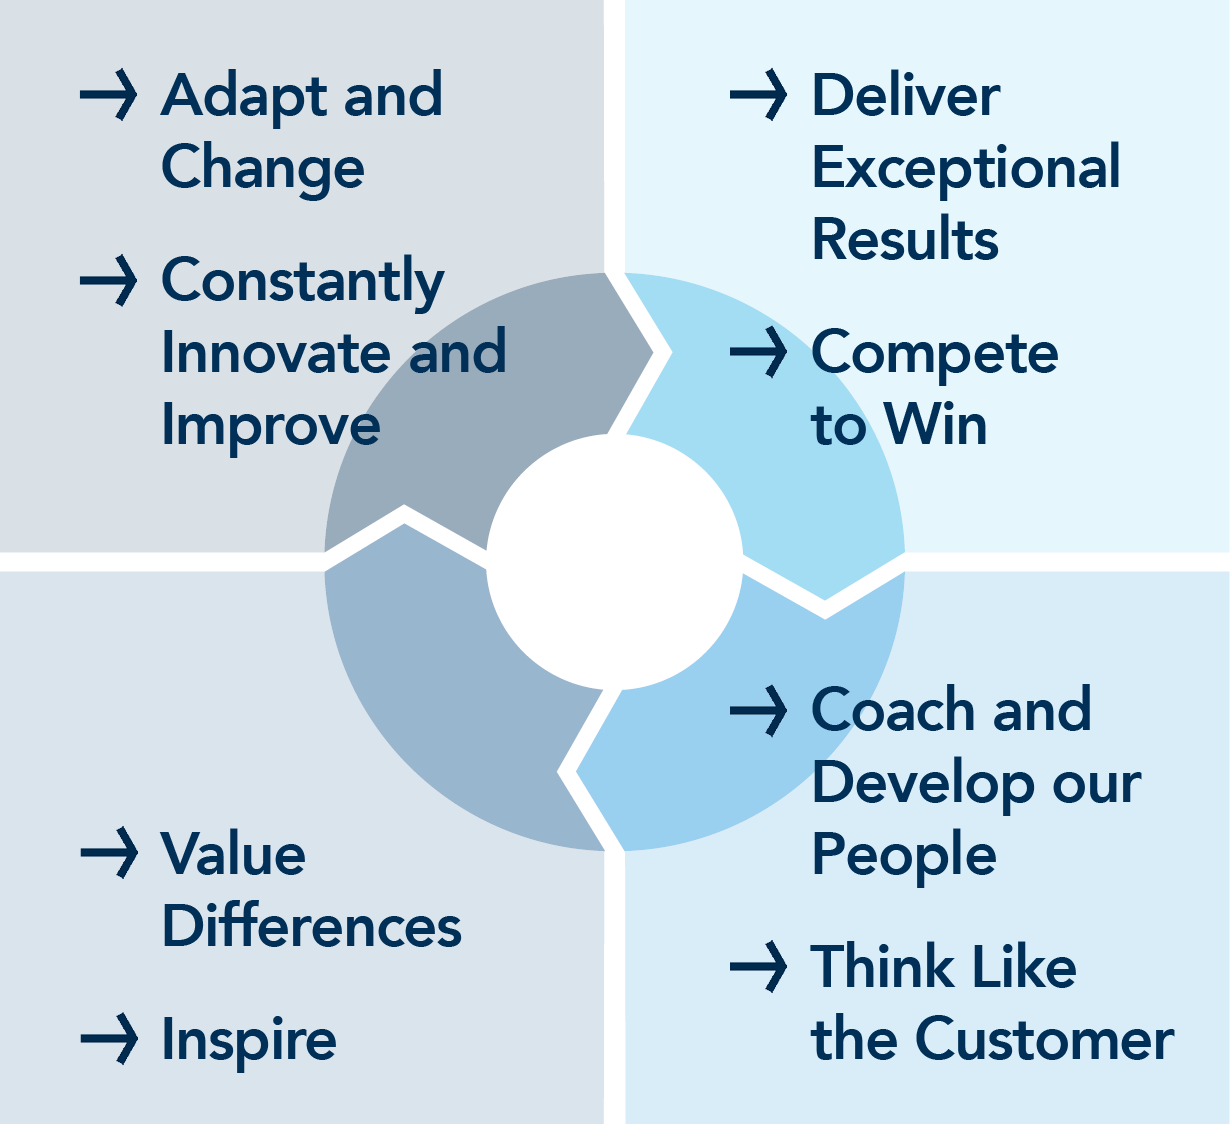 An image collage of four images with a circle broken into four sections in the middle. Top left image, 'Adapt and Change & Constantly Innovate and Improve', Top right image, 'Deliver Exceptional Results and Compete to Win', Bottom right image, 'Coach and Develop our People & Think like the Customer', and Bottom left image, 'Value Differences & Inspire'